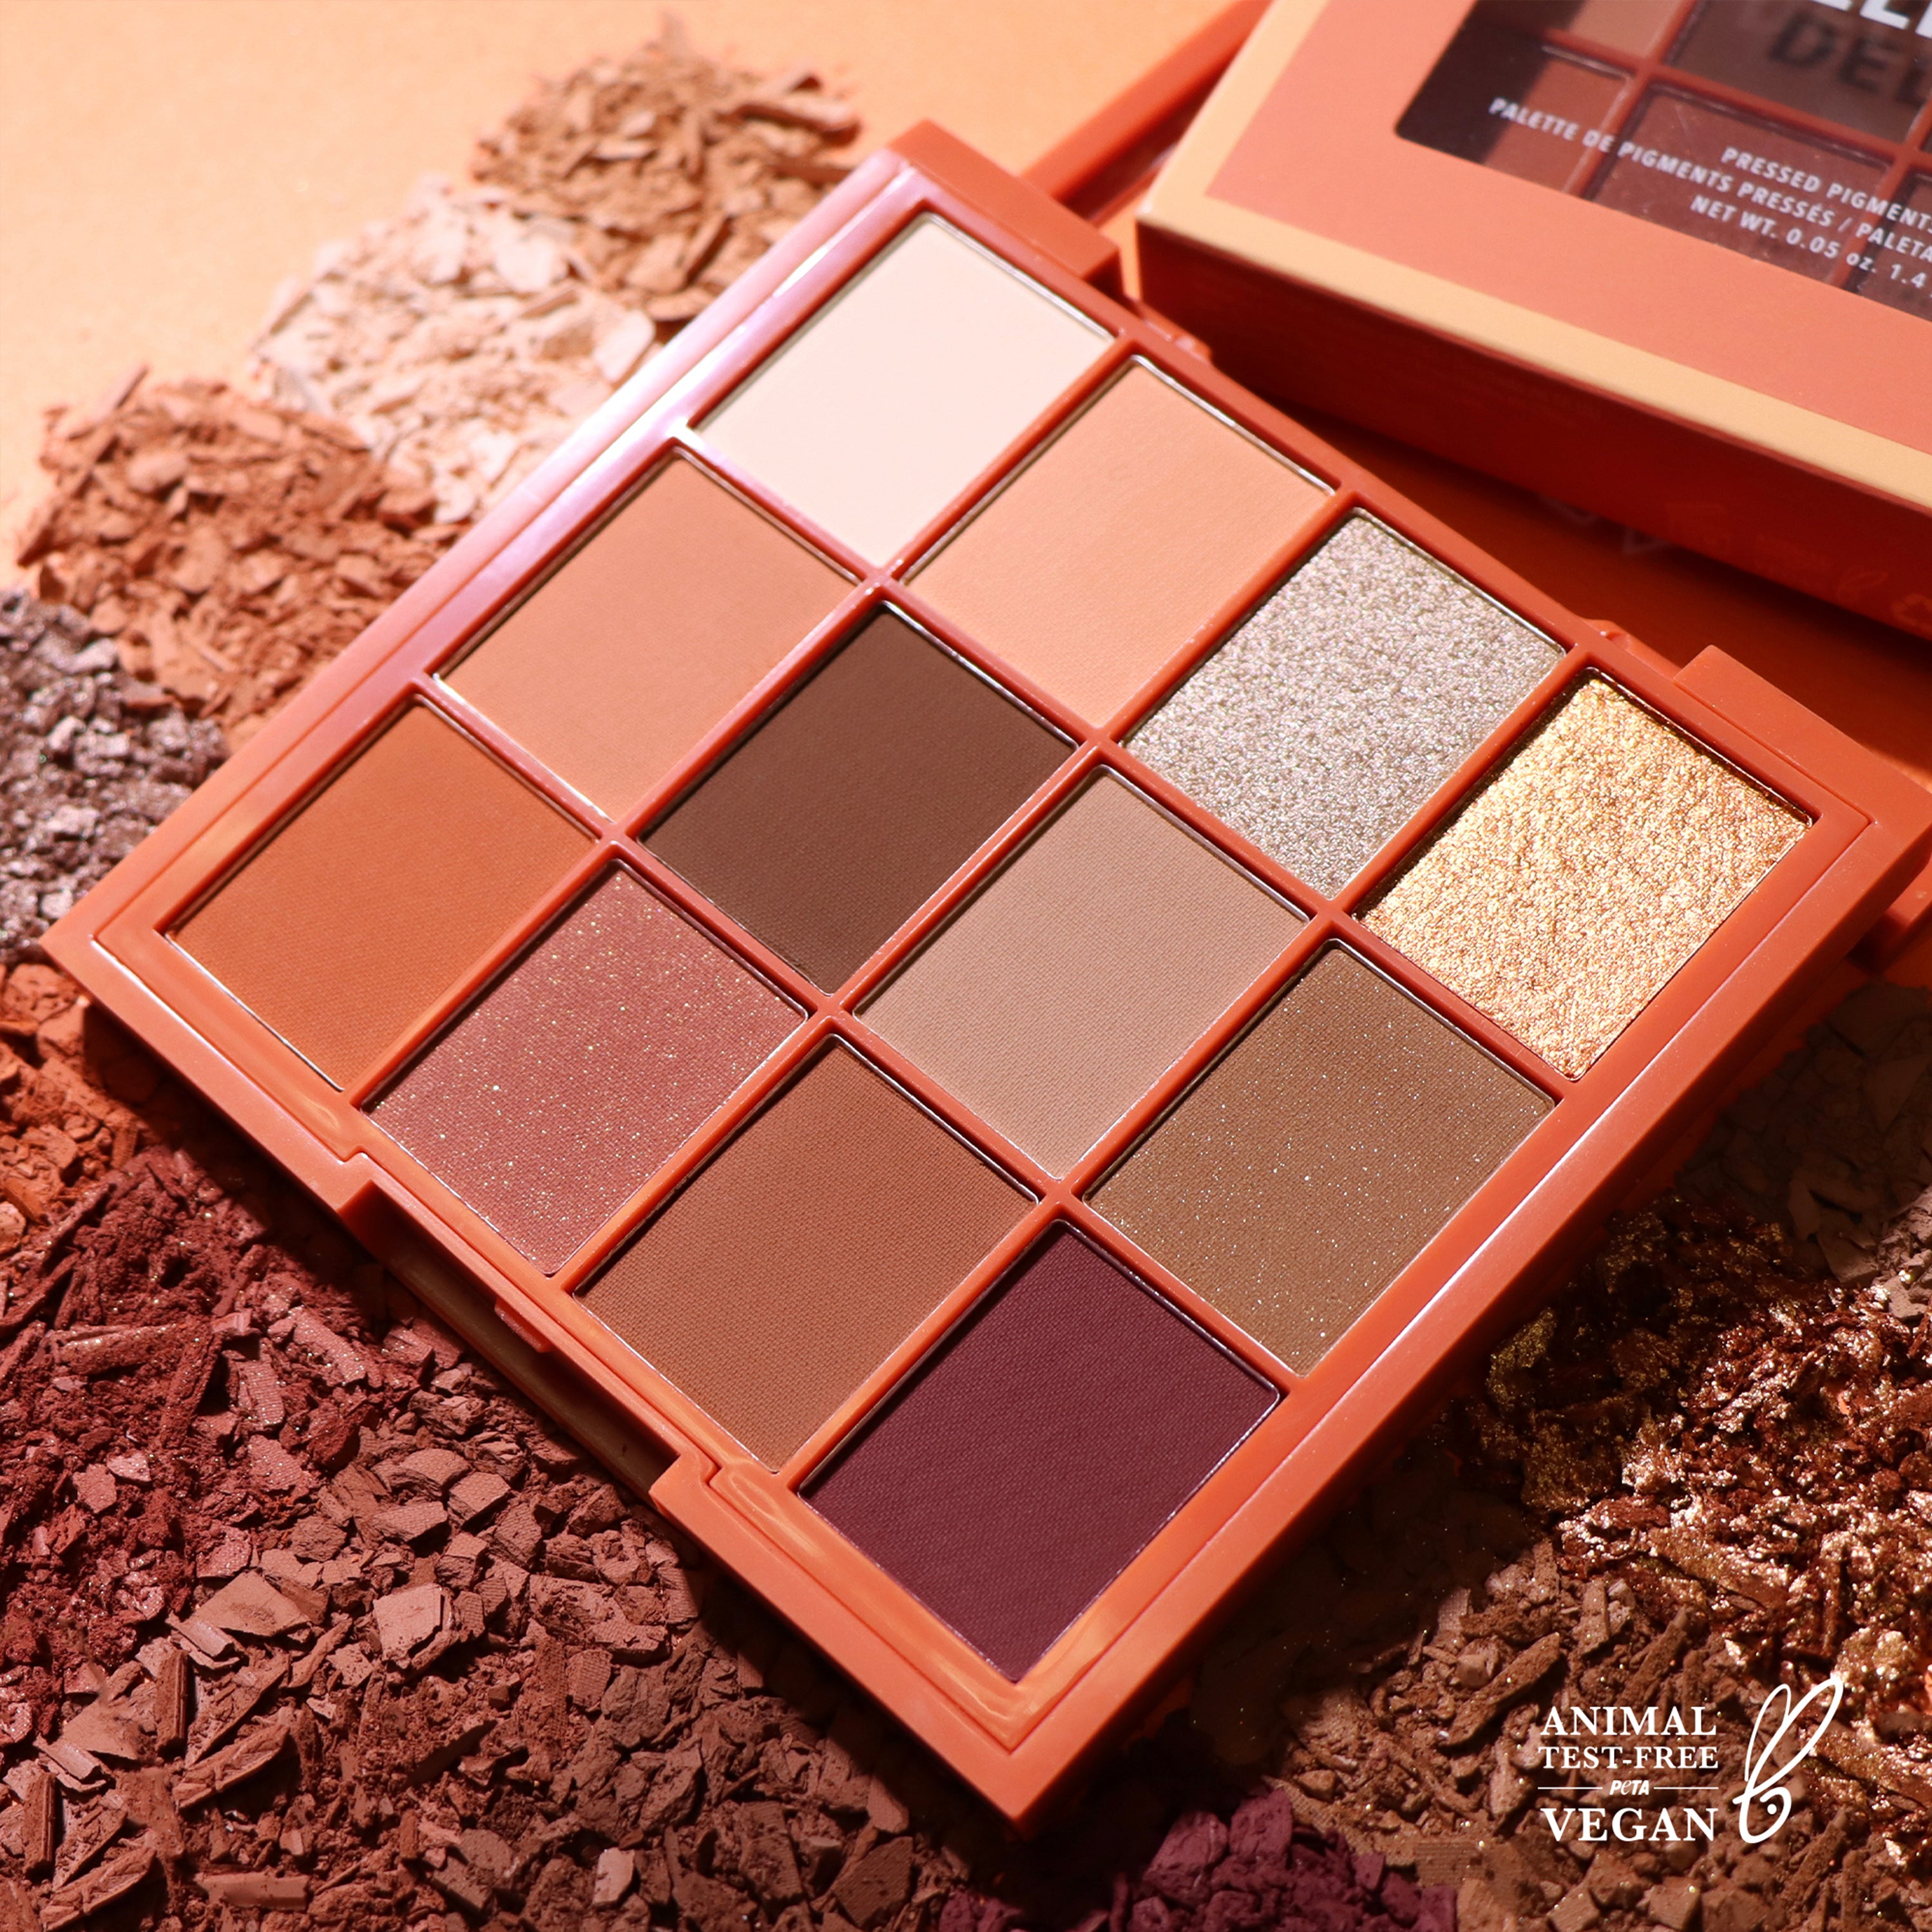 Spiced Delights Palette